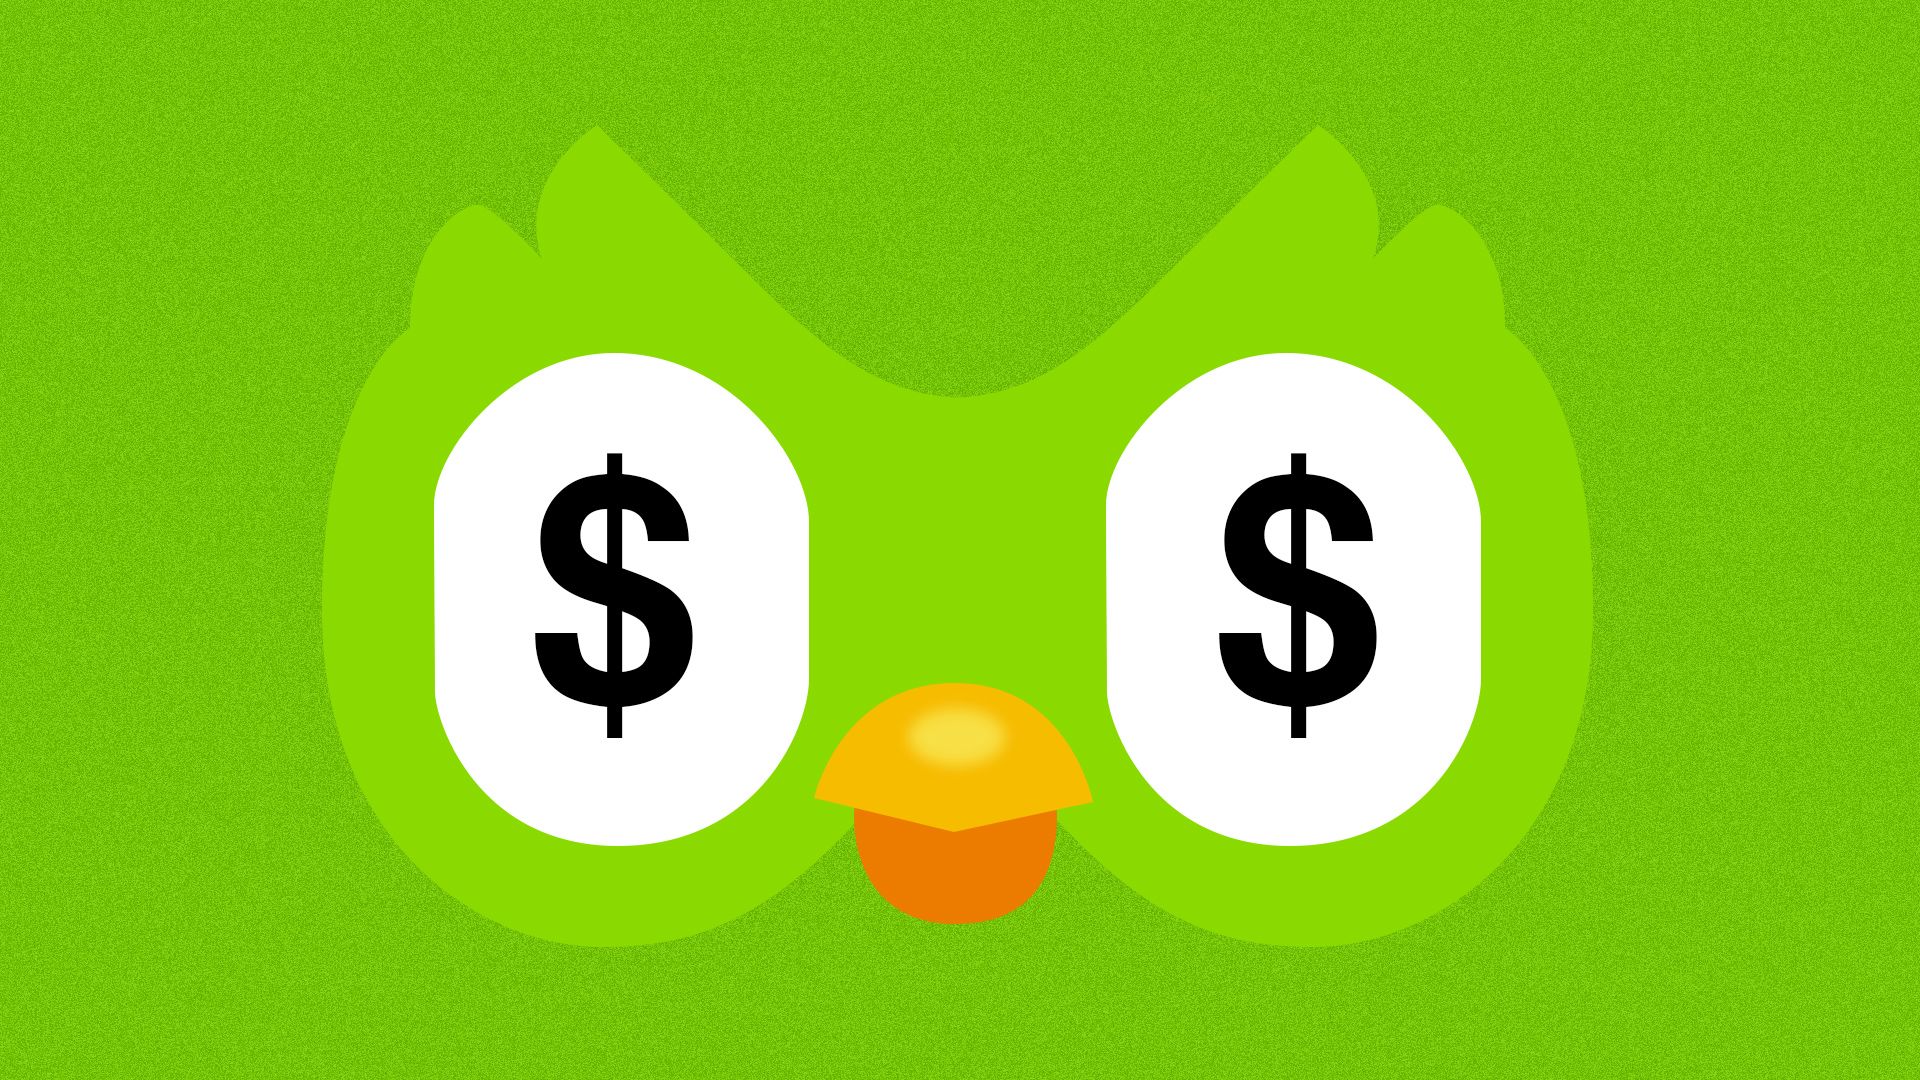  Illustration of the duolingo owl with dollar signs as eyes.